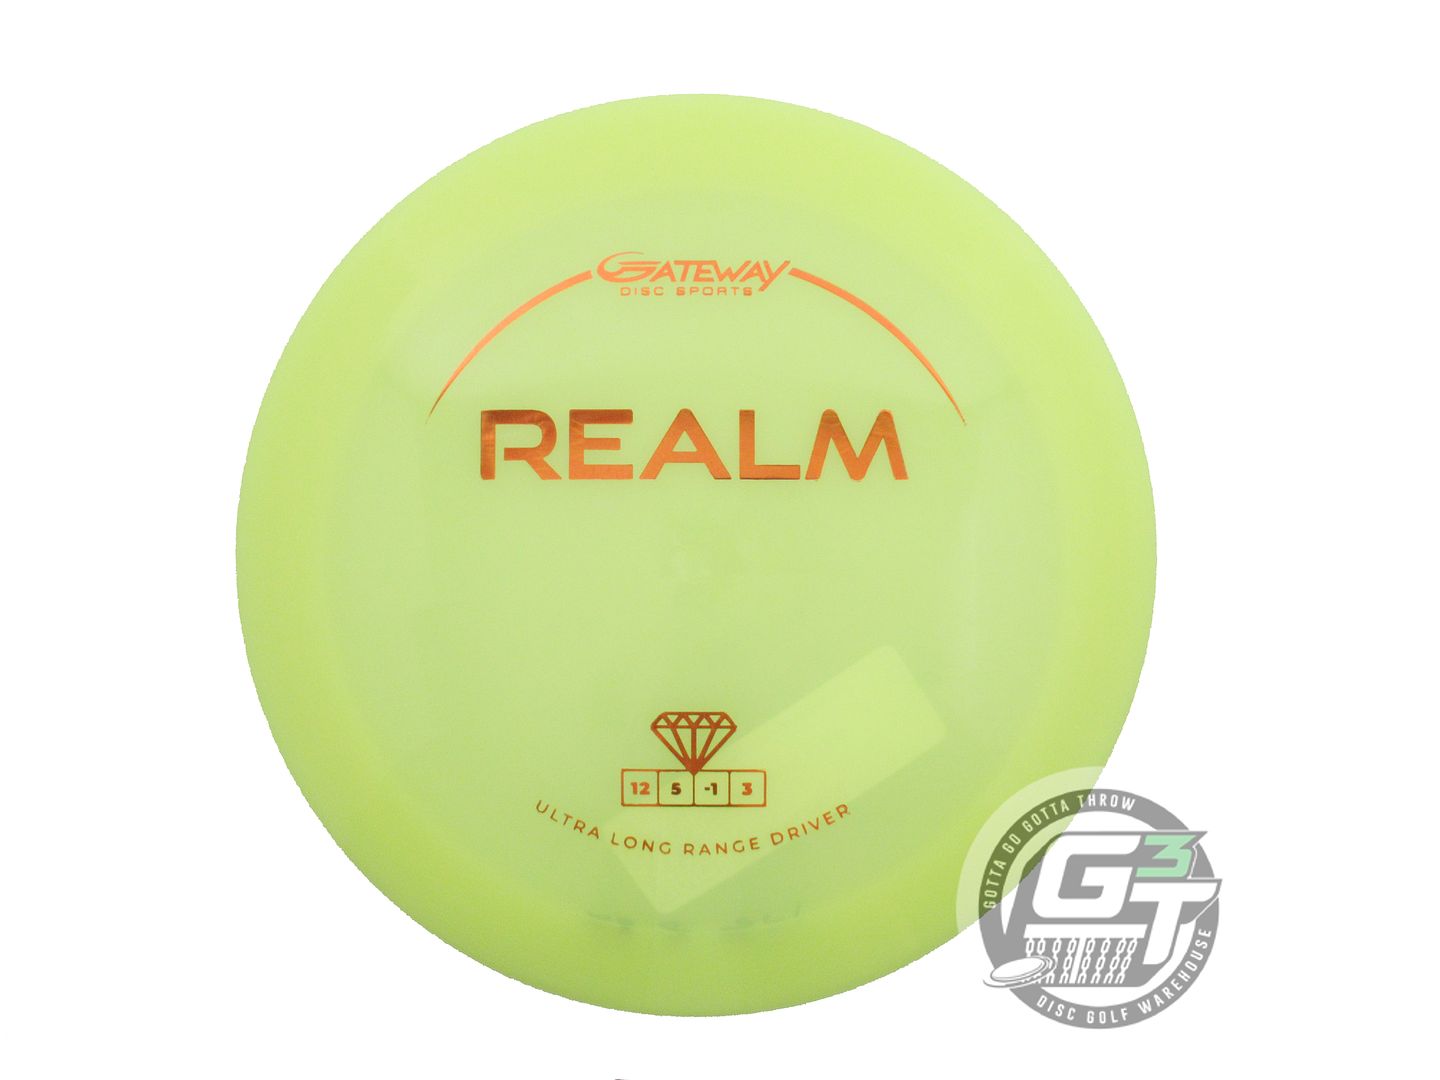 Gateway Diamond Realm Distance Driver Golf Disc (Individually Listed)